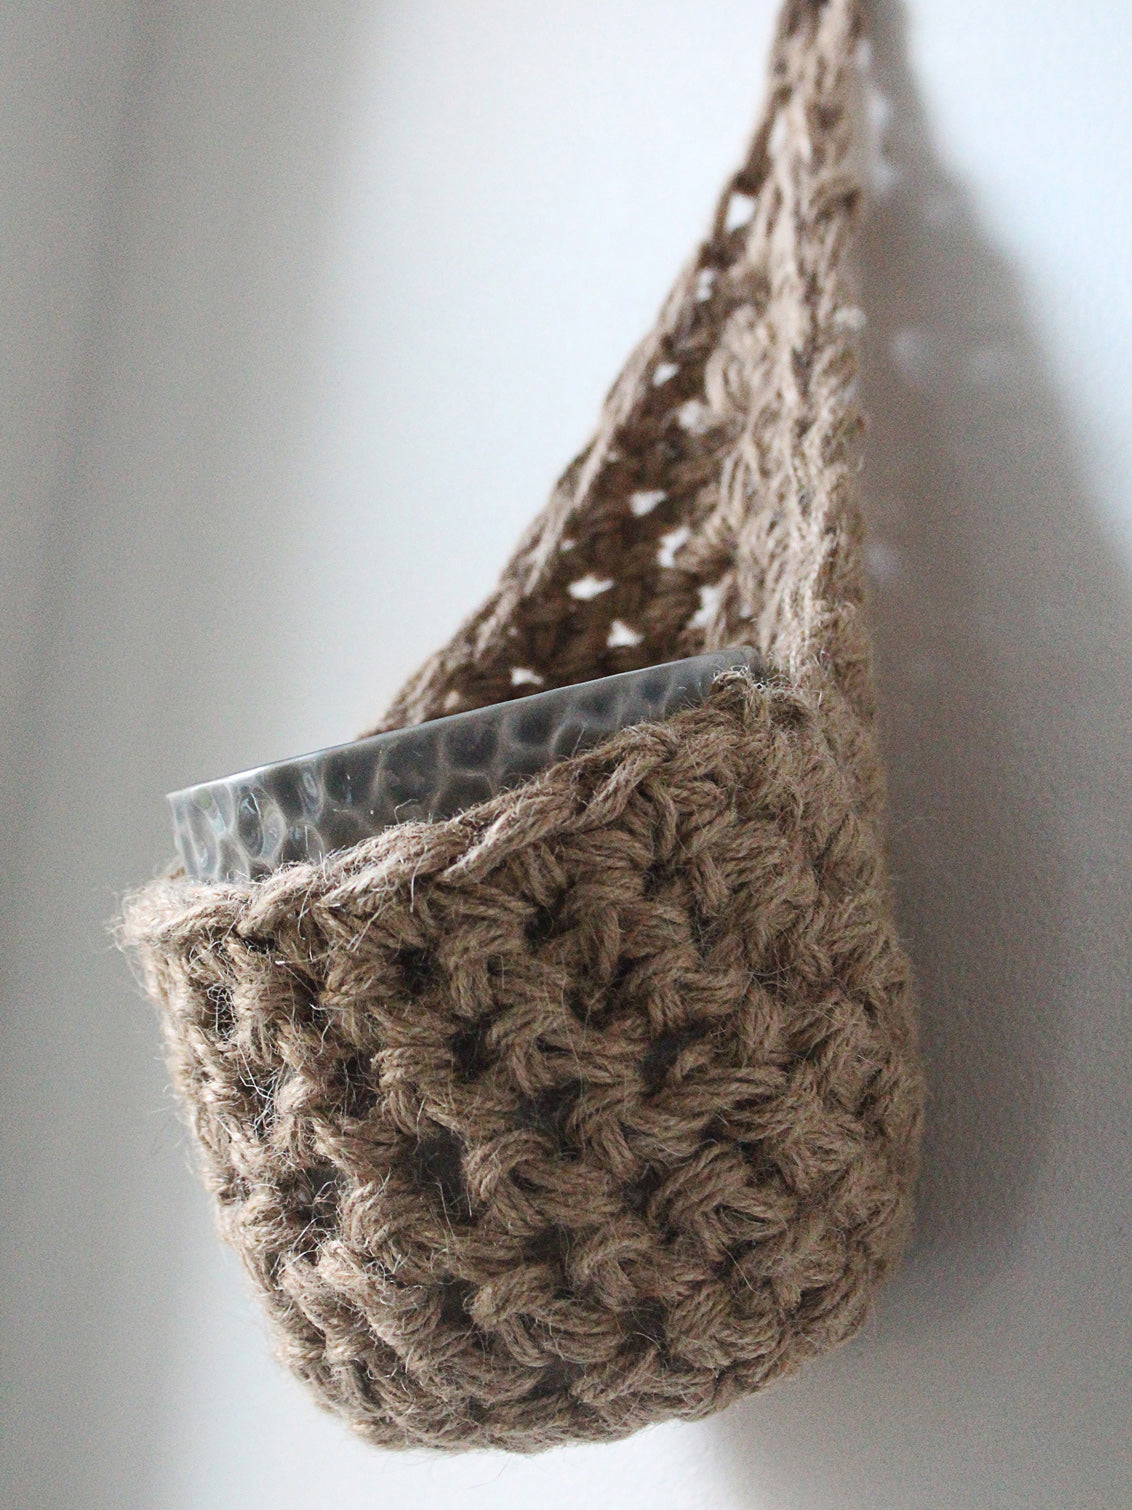 Photo showing a single handmade crochet jute hanging wall planter, against a white wall. The planter is a tierdrop shape and is holding a pot only.